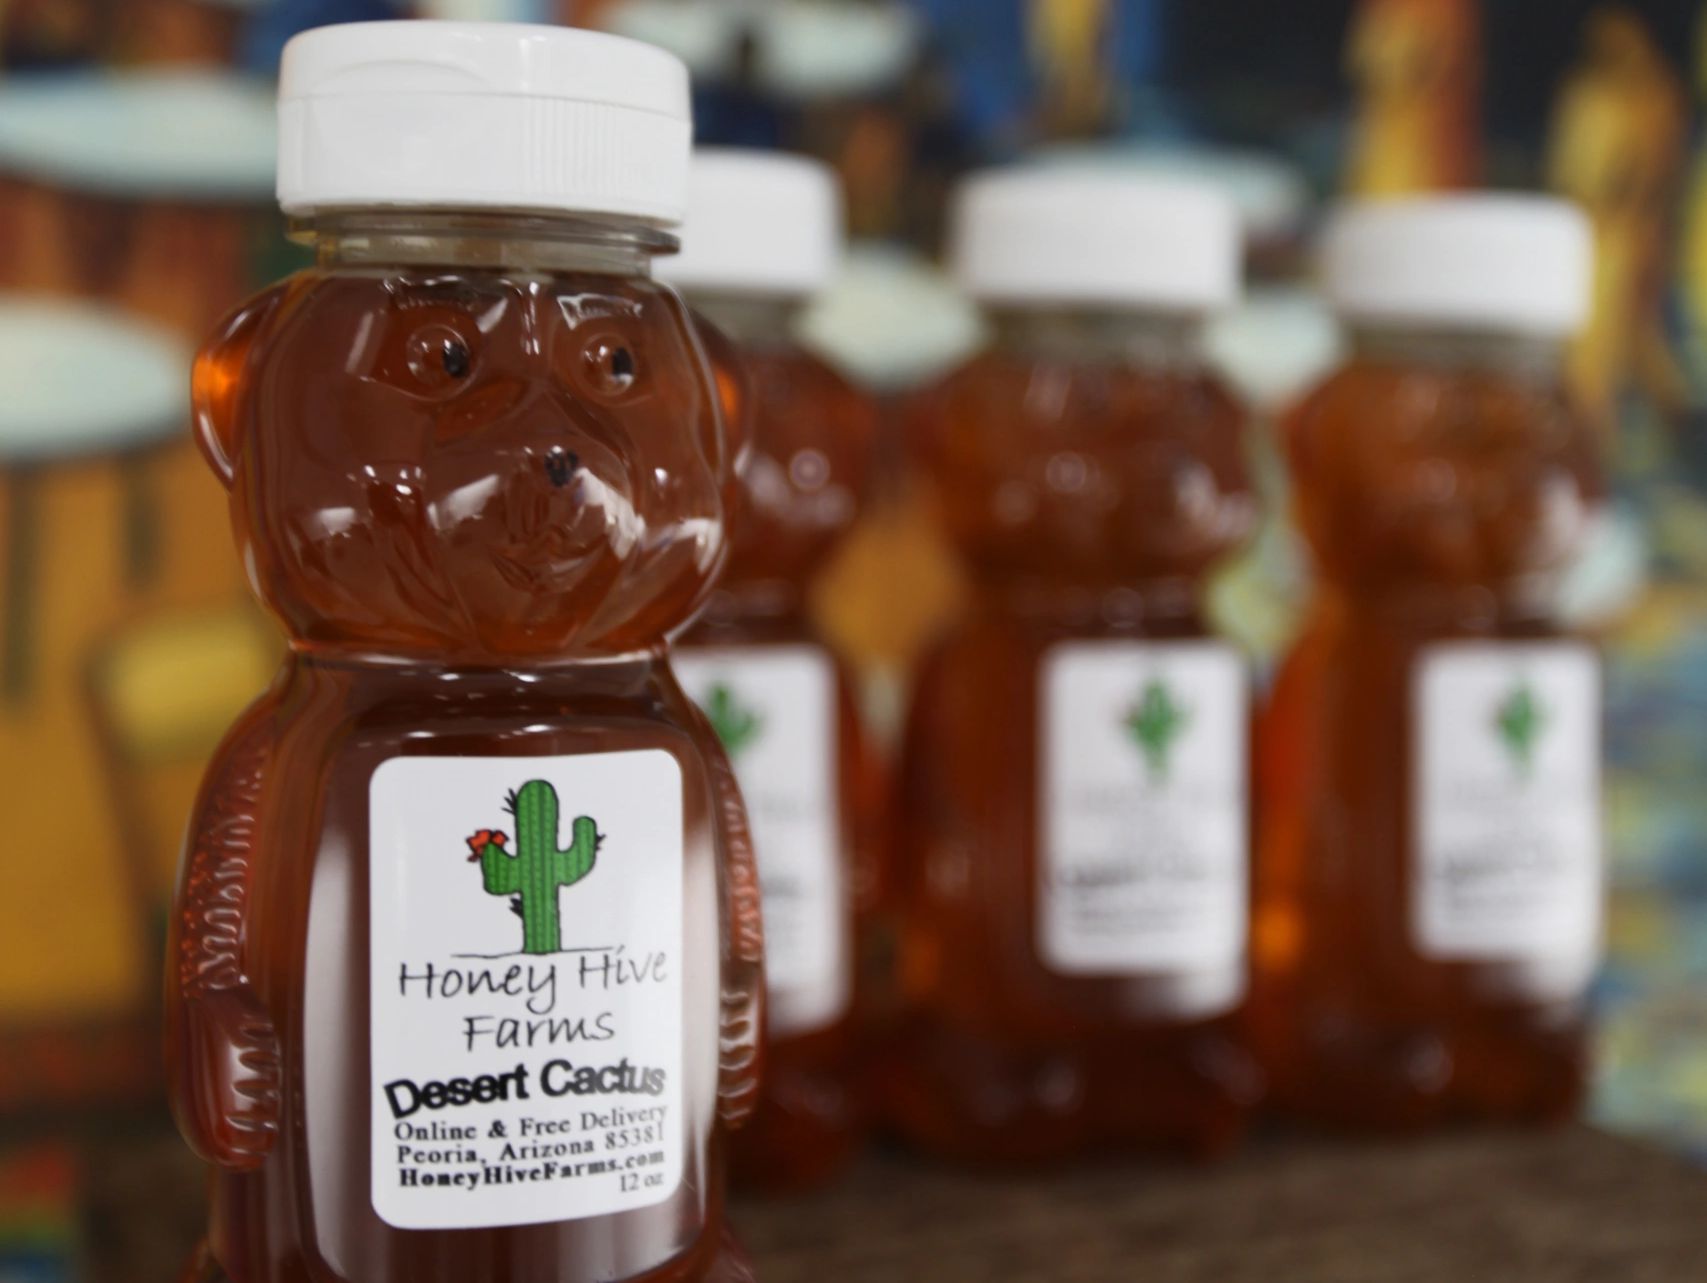 Cactus honey, Harvest by Honey Hive Farms for customers in Chandler Arizona for Chandler honey. Raw